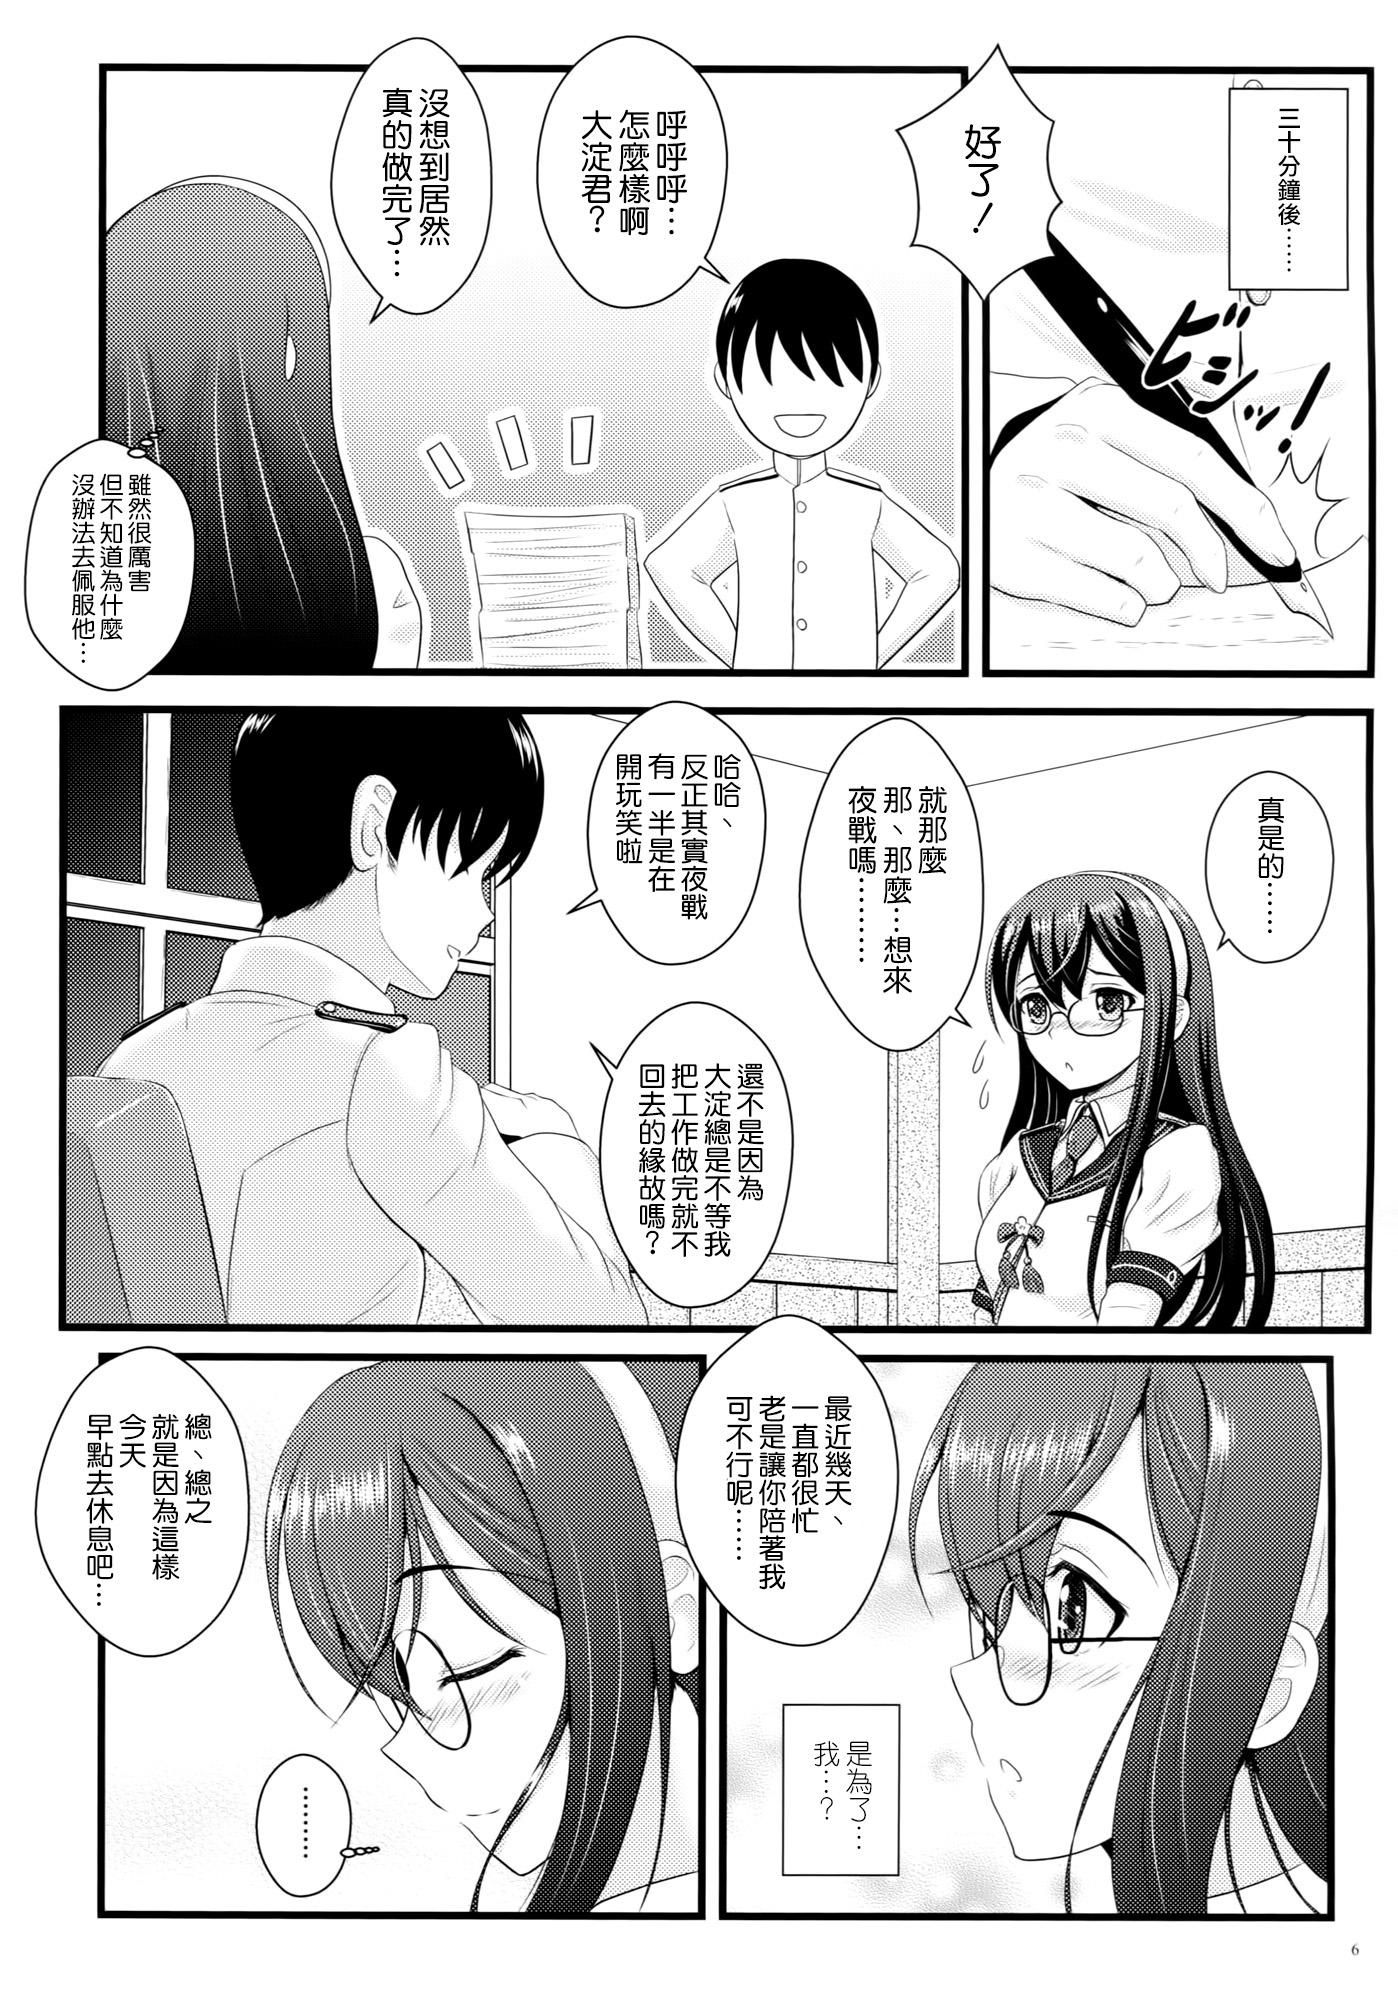 Mulher Private Secretary - Kantai collection Chilena - Page 6